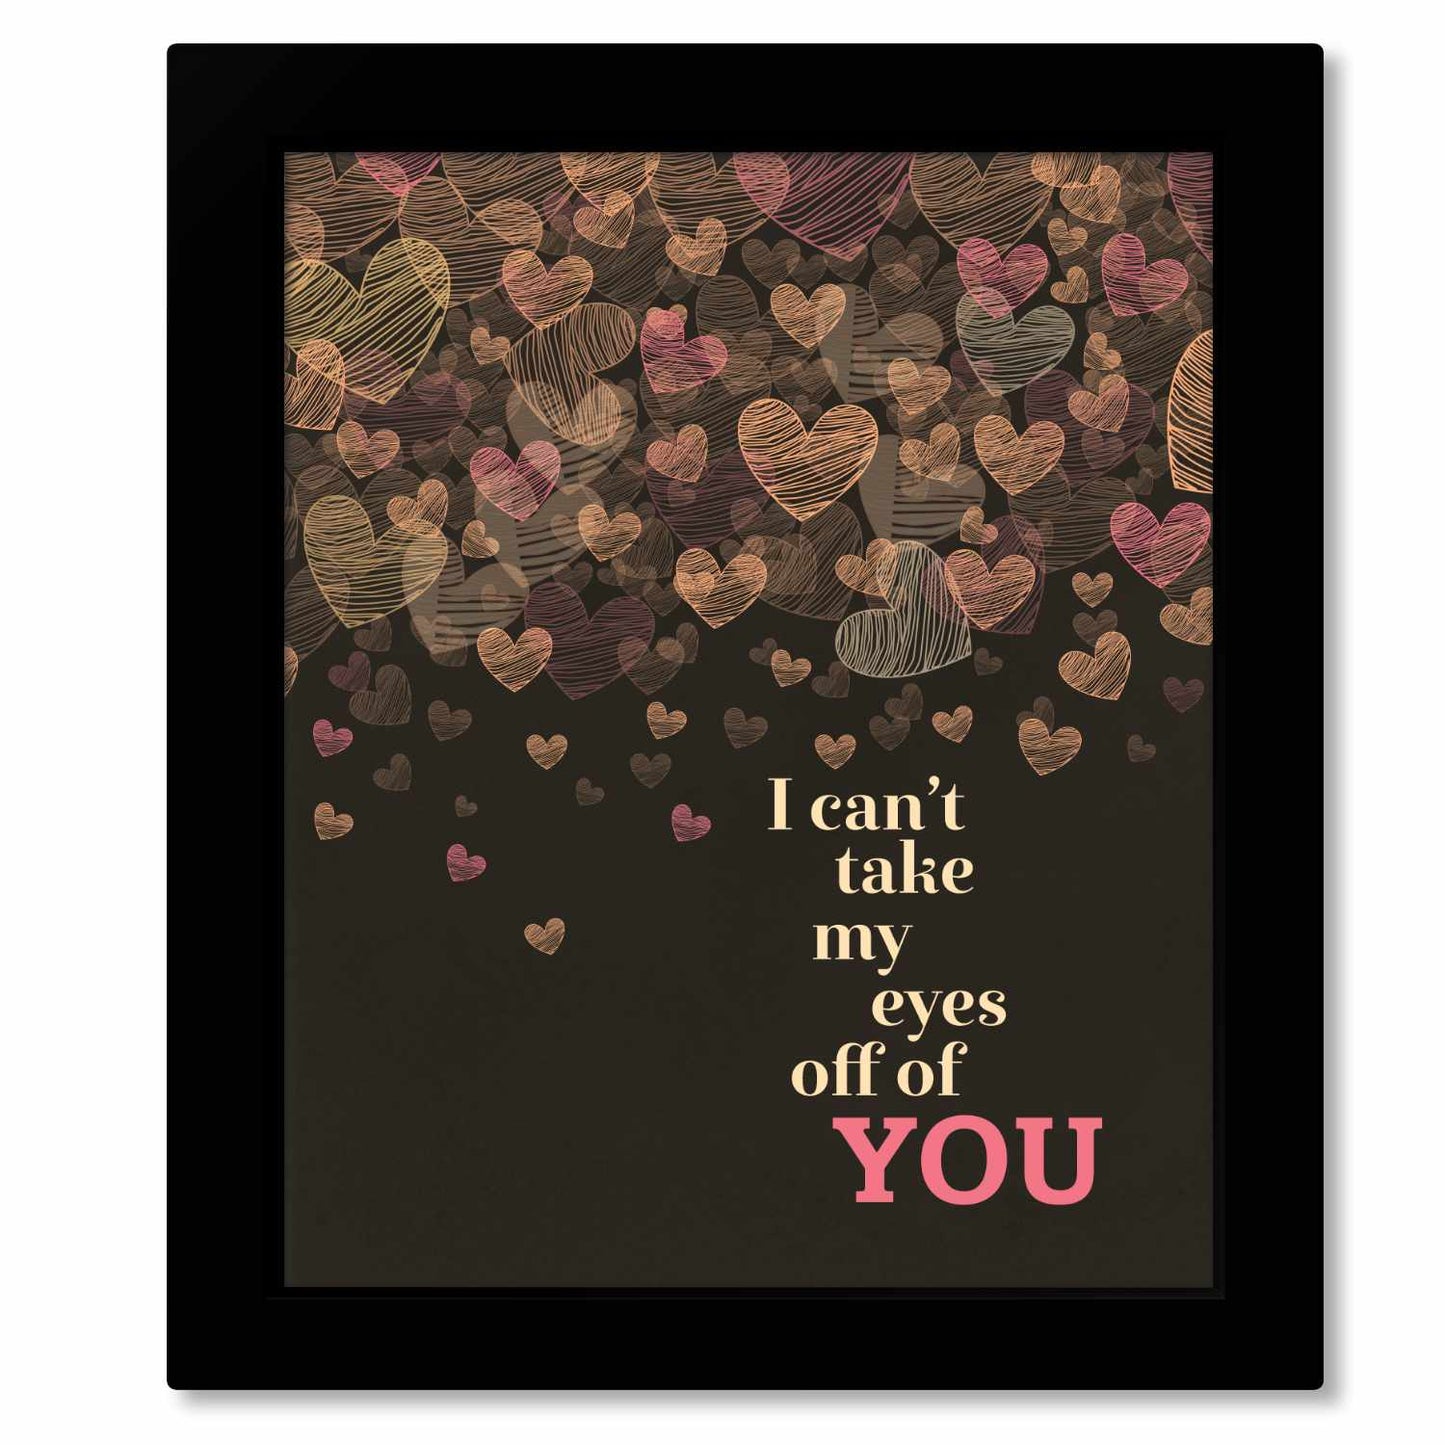 Can't Take My Eyes off You by Frankie Valli - 60s Love Song Song Lyrics Art Song Lyrics Art 8x10 Framed Print (without mat) 